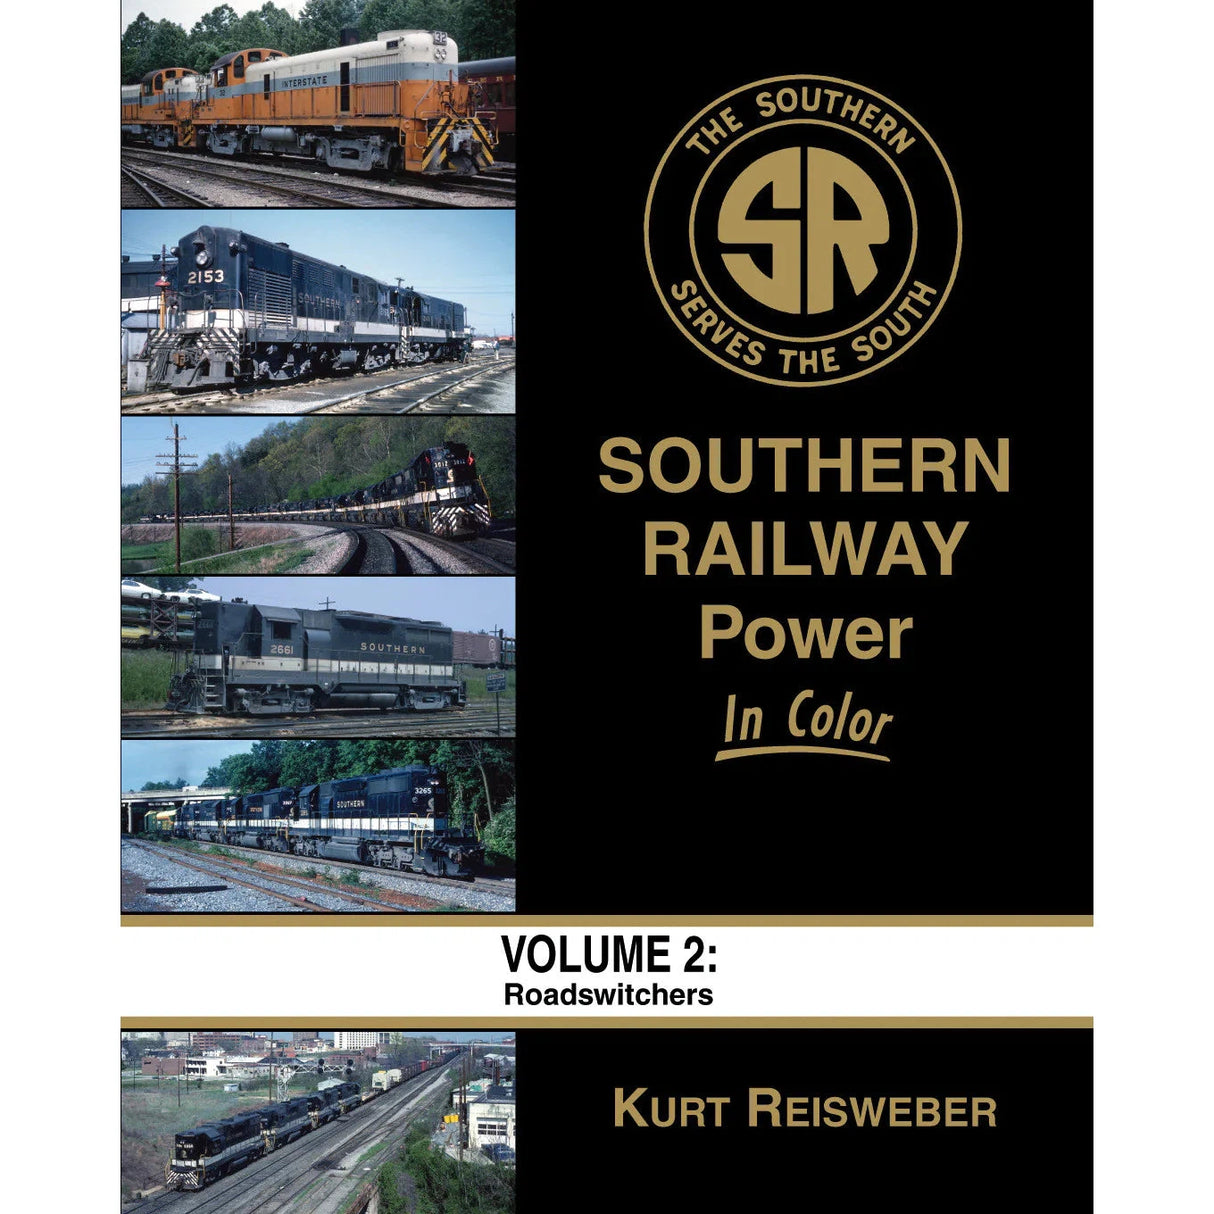 Morning Sun Books MSB1583 Southern Railway Power In Color Volume 2